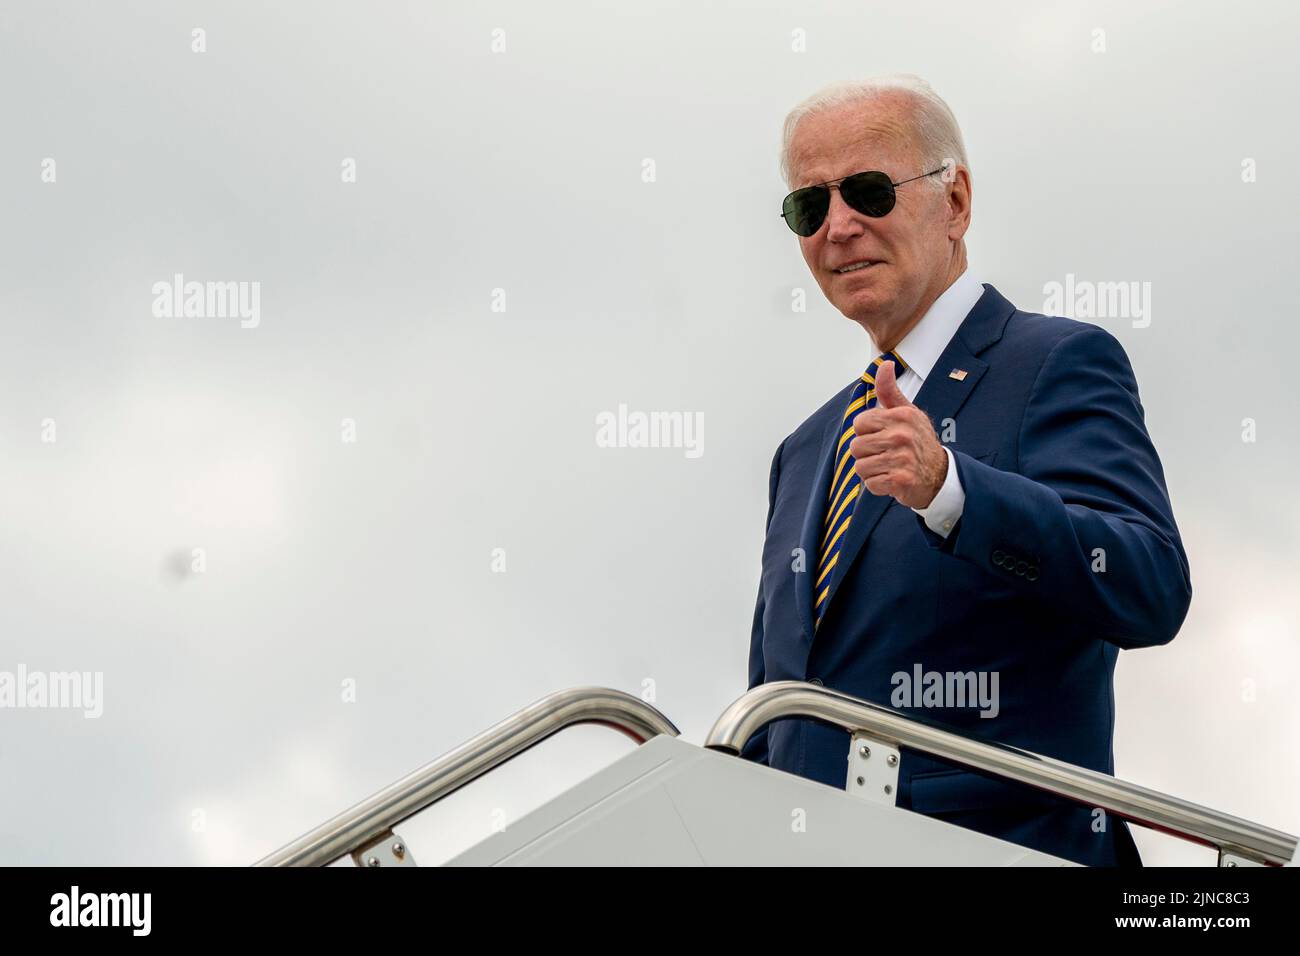 United States President Joe Biden gives a thumbs up as he boards Air Force One at Joint Base Andrews, Maryland, USA, 10 August 2022.Credit: Shawn Thew/Pool via CNP /MediaPunch Stock Photo